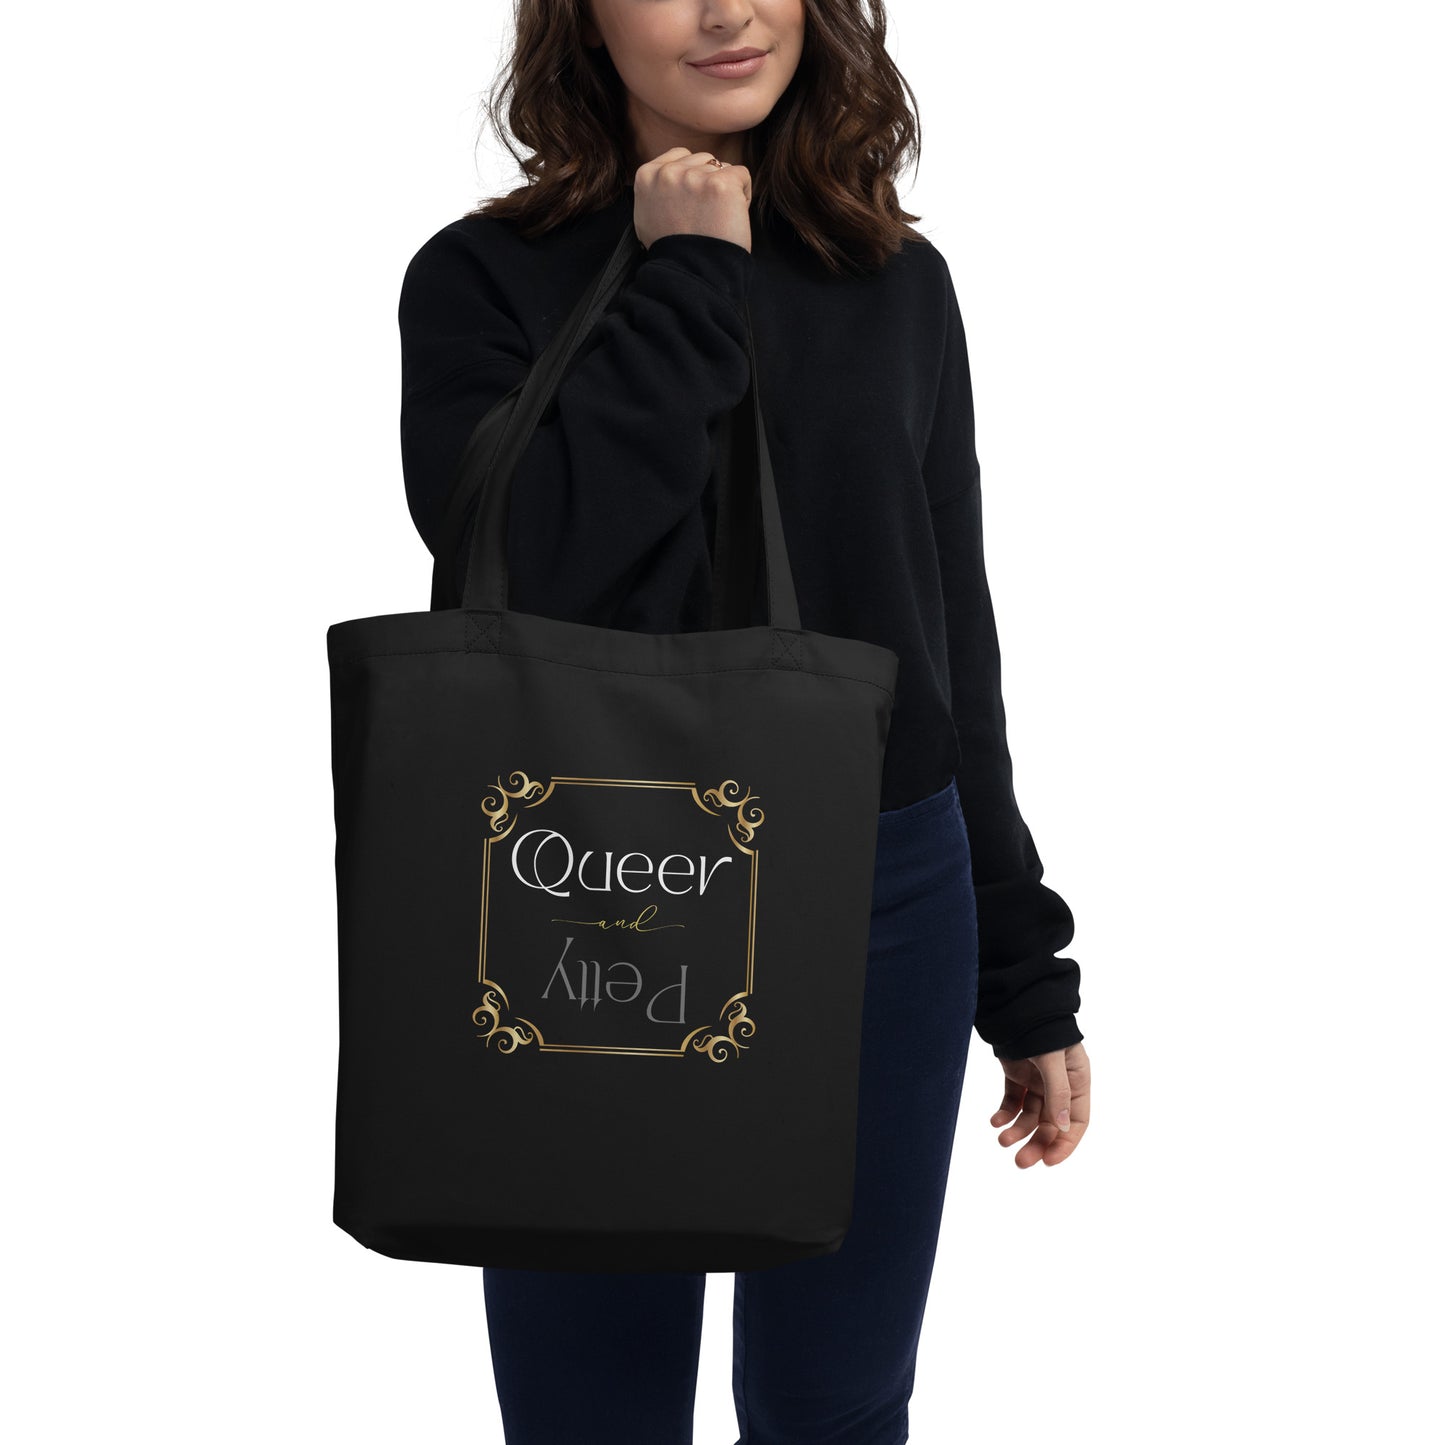 Queer & Petty Eco Tote Bag